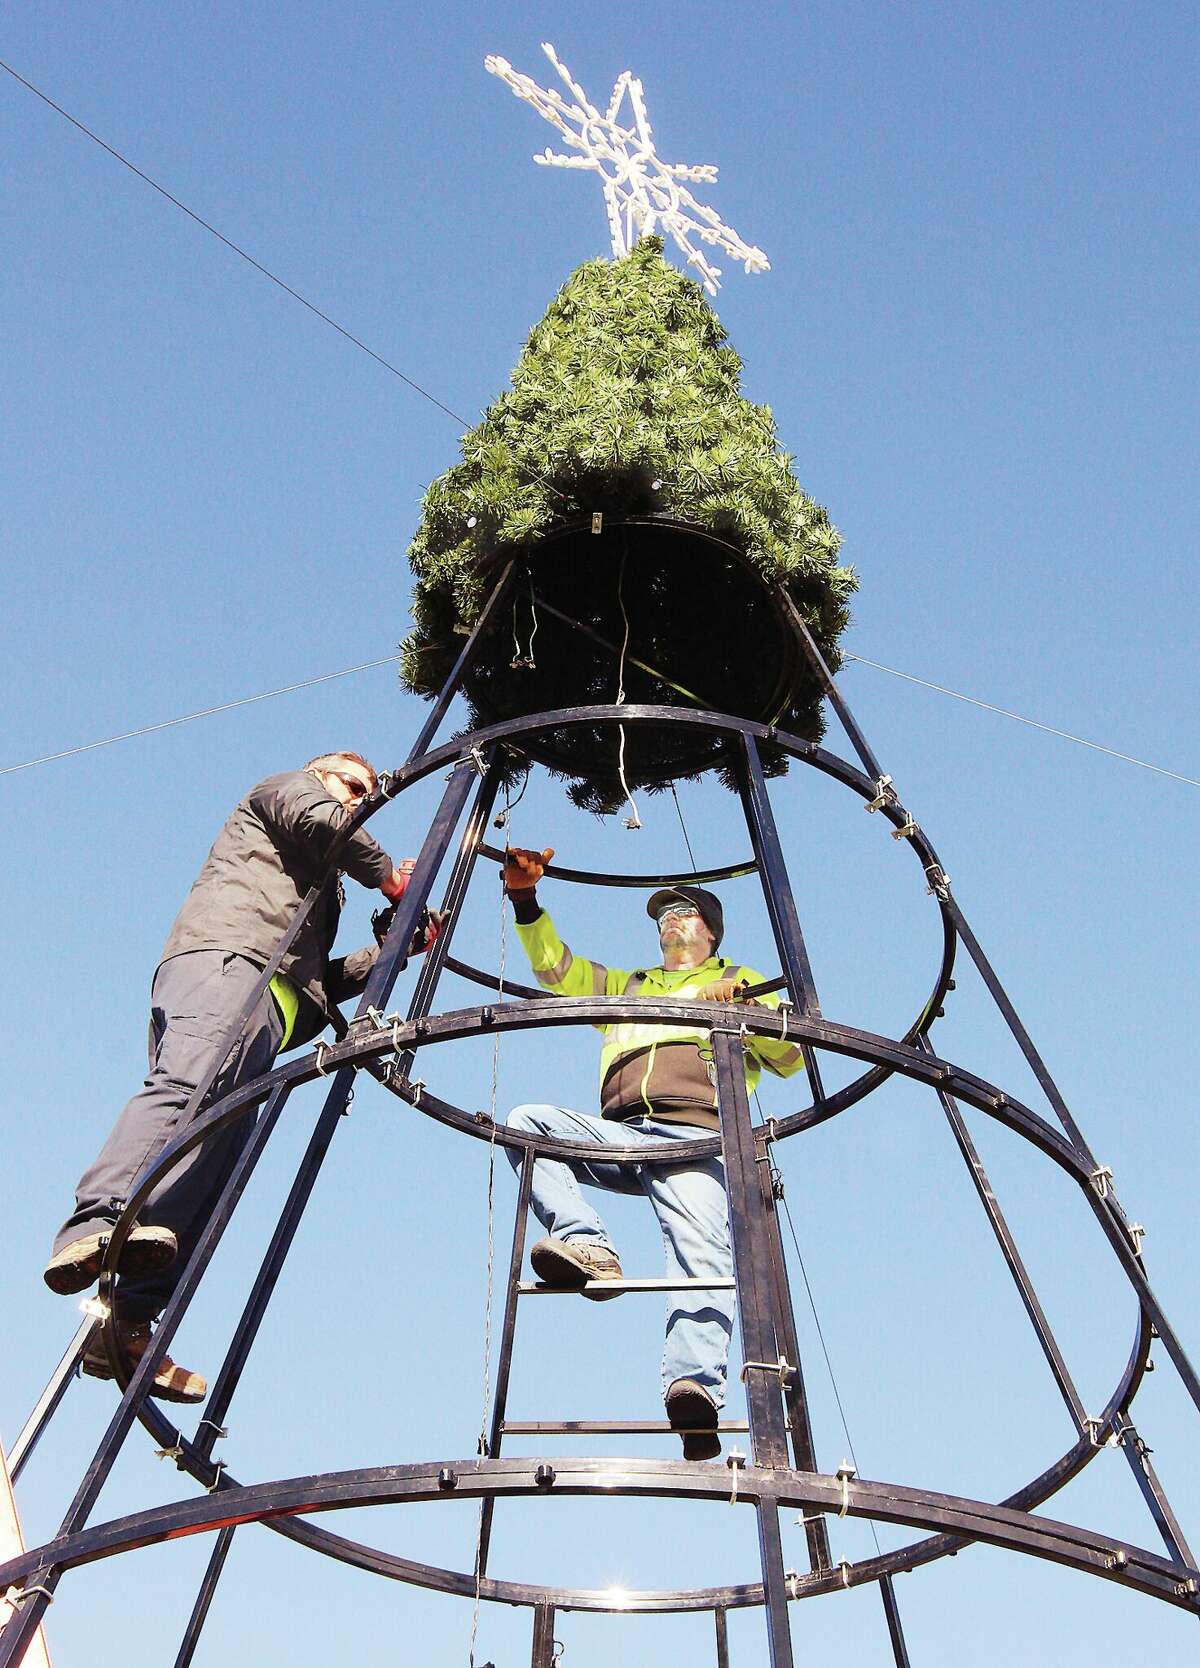 John Badman|The Telegraph Alton Parks and Recreation workers were taking down the city's second Christmas tree Tuesday morning and were down to just the topper on the tree. The tree, which was new this year, was donated for use at State House Circle next to the Rotary Centennial Fountain. The Alton-Godfrey Rotary Club disassembled the downtown Christmas tree last weekend. Both trees will be kept in storage until December.